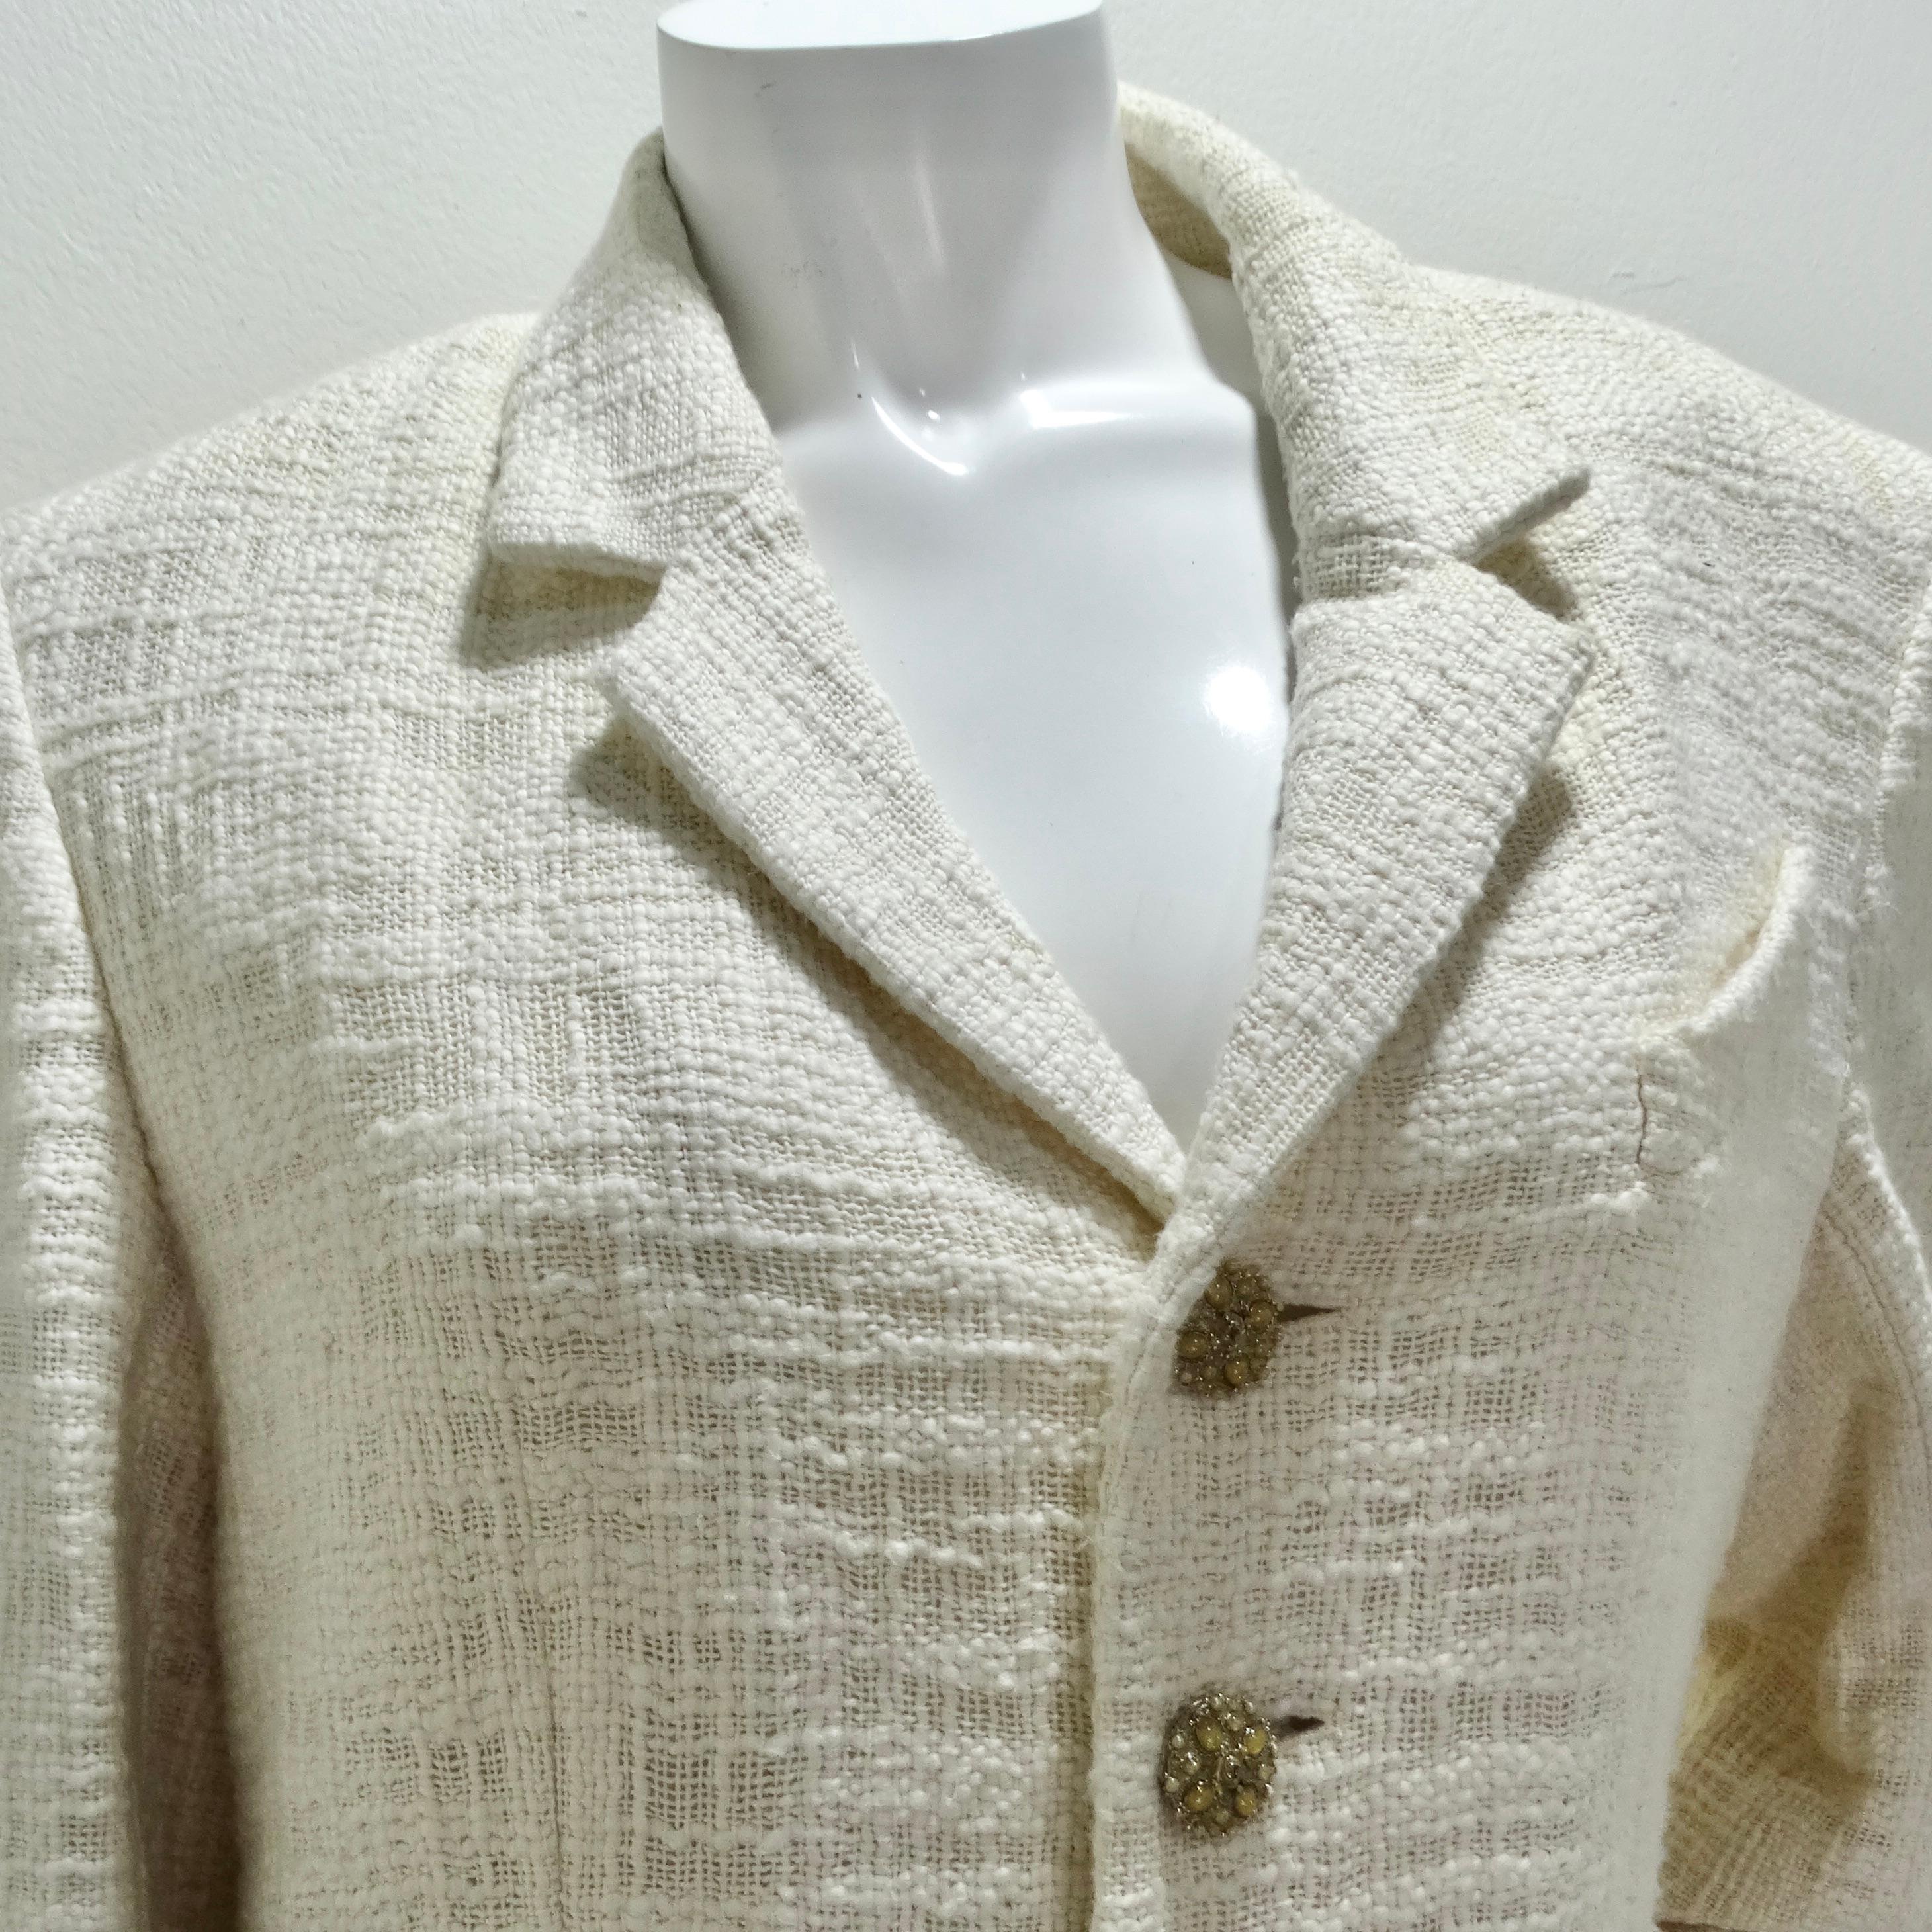 The Chanel 2012 Gripoix Tweed Blazer is an exquisite and luxurious piece from the Metier d’Art 